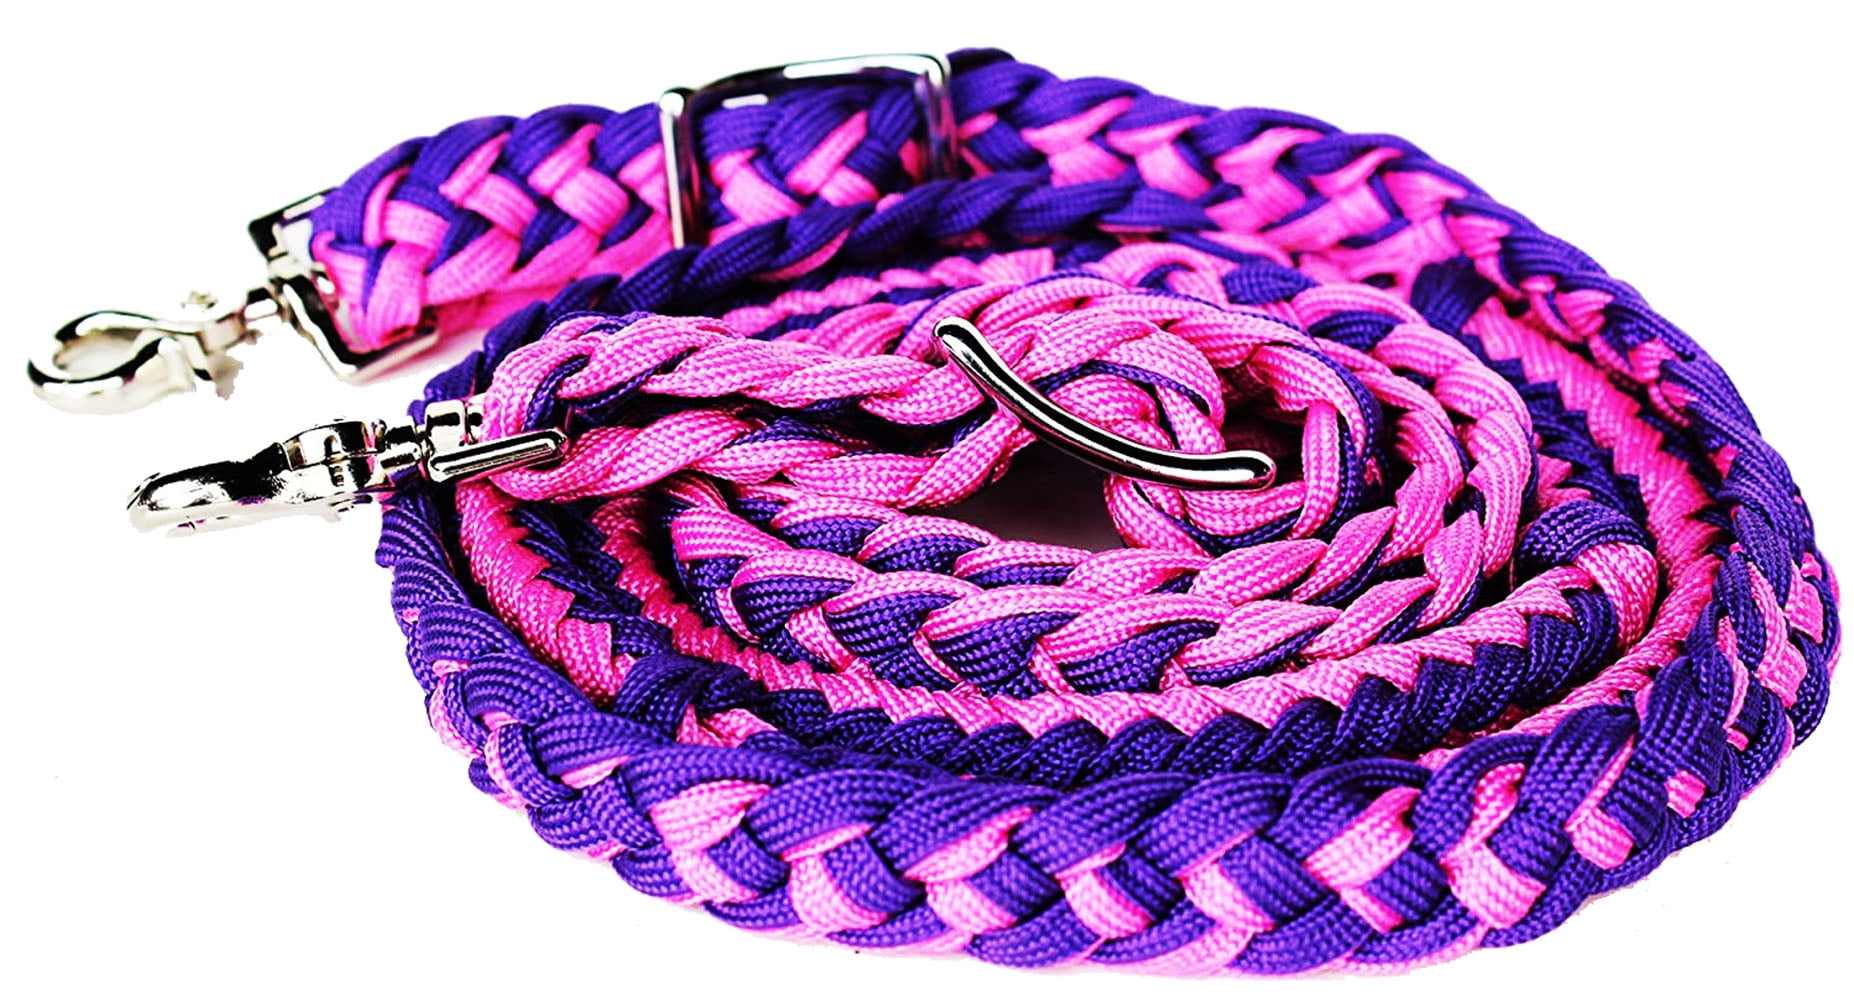 TOUGH-1 KNOTTED CORD BARREL REINS ROPING POLY WESTERN 7 FEET PURPLE HORSE TACK 